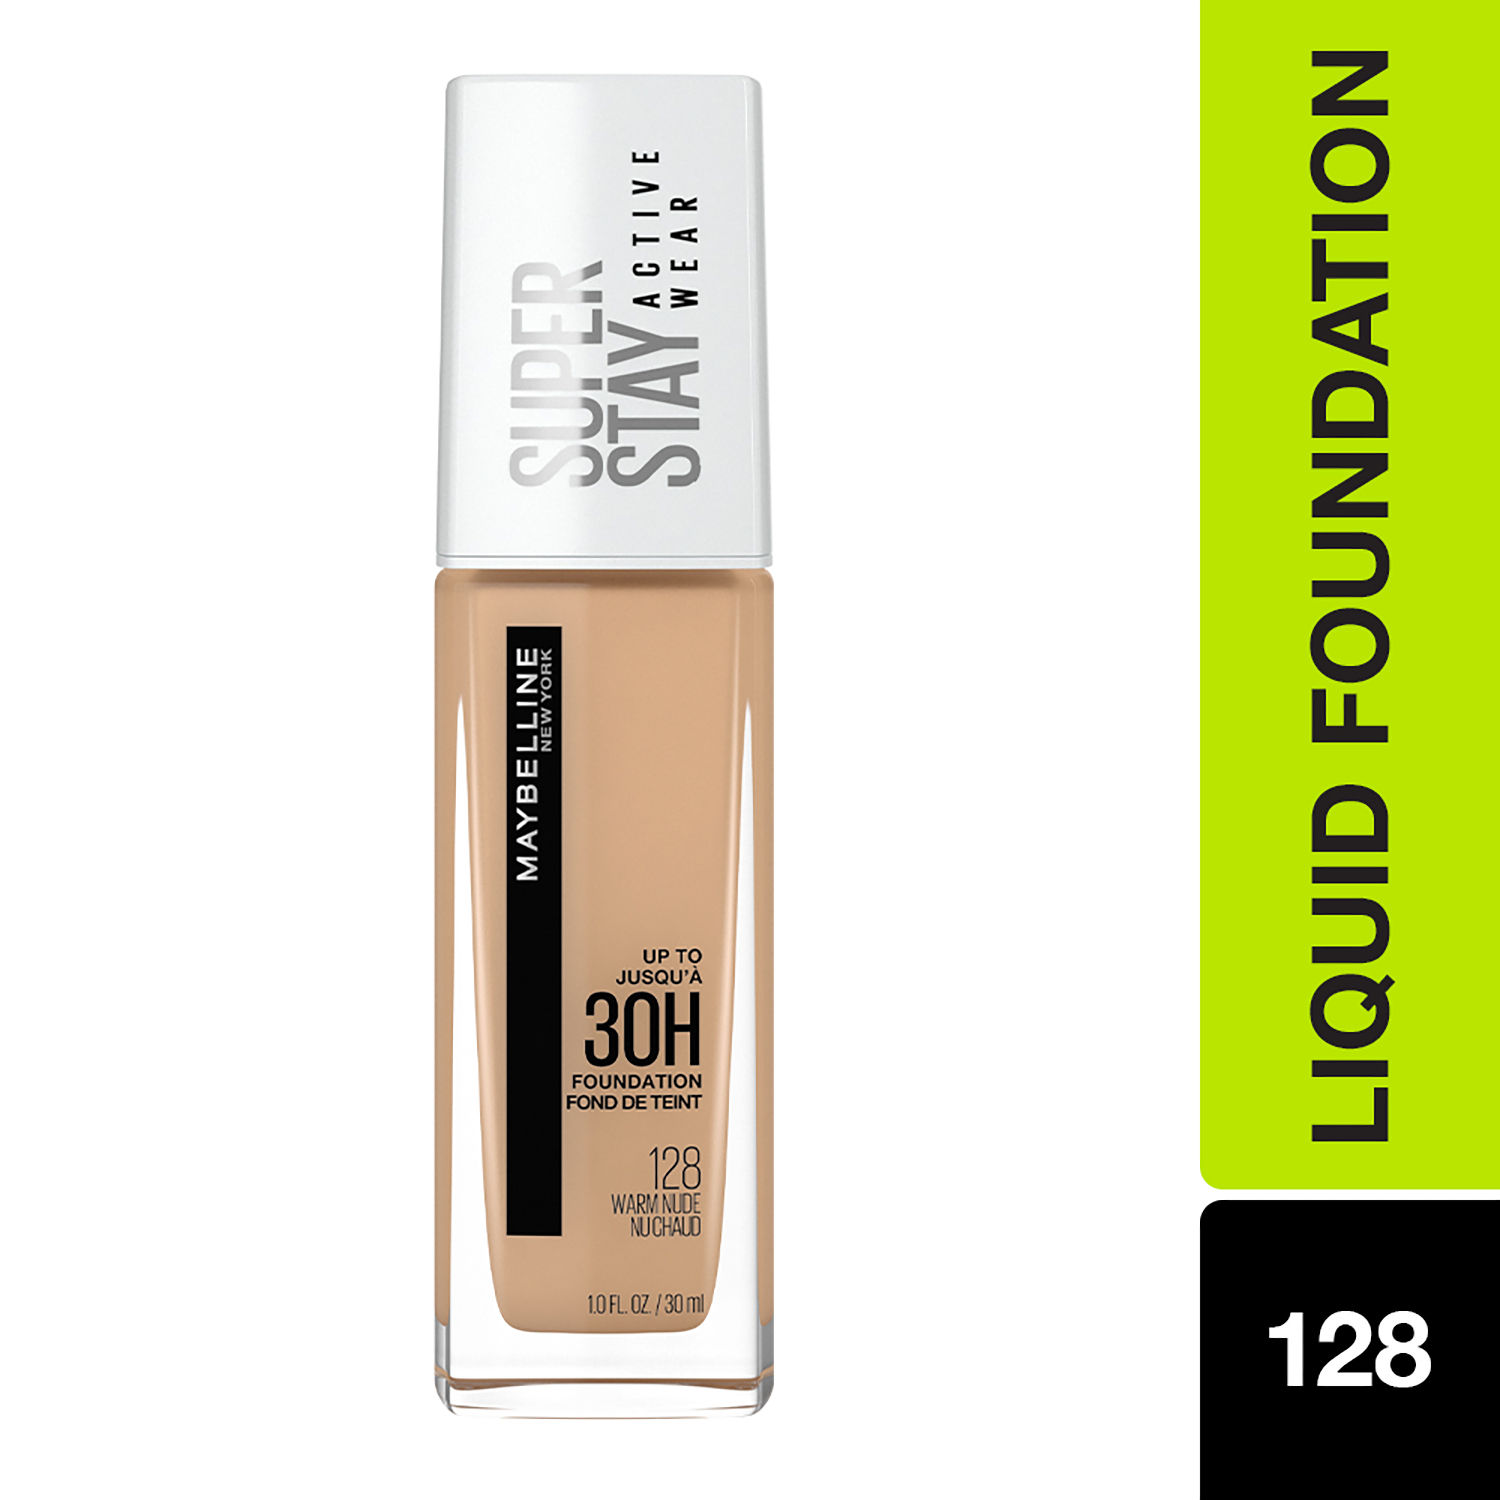 https://media6.ppl-media.com//tr:h-750,w-750,c-at_max,dpr-2/static/img/product/365439/maybelline-new-york-super-stay-full-coverage-active-wear-liquid-foundation-matte-finish-with-30-hr-wear-transfer-proof-128-warm-nude-30ml_1_display_1691411400_982b53af.jpg